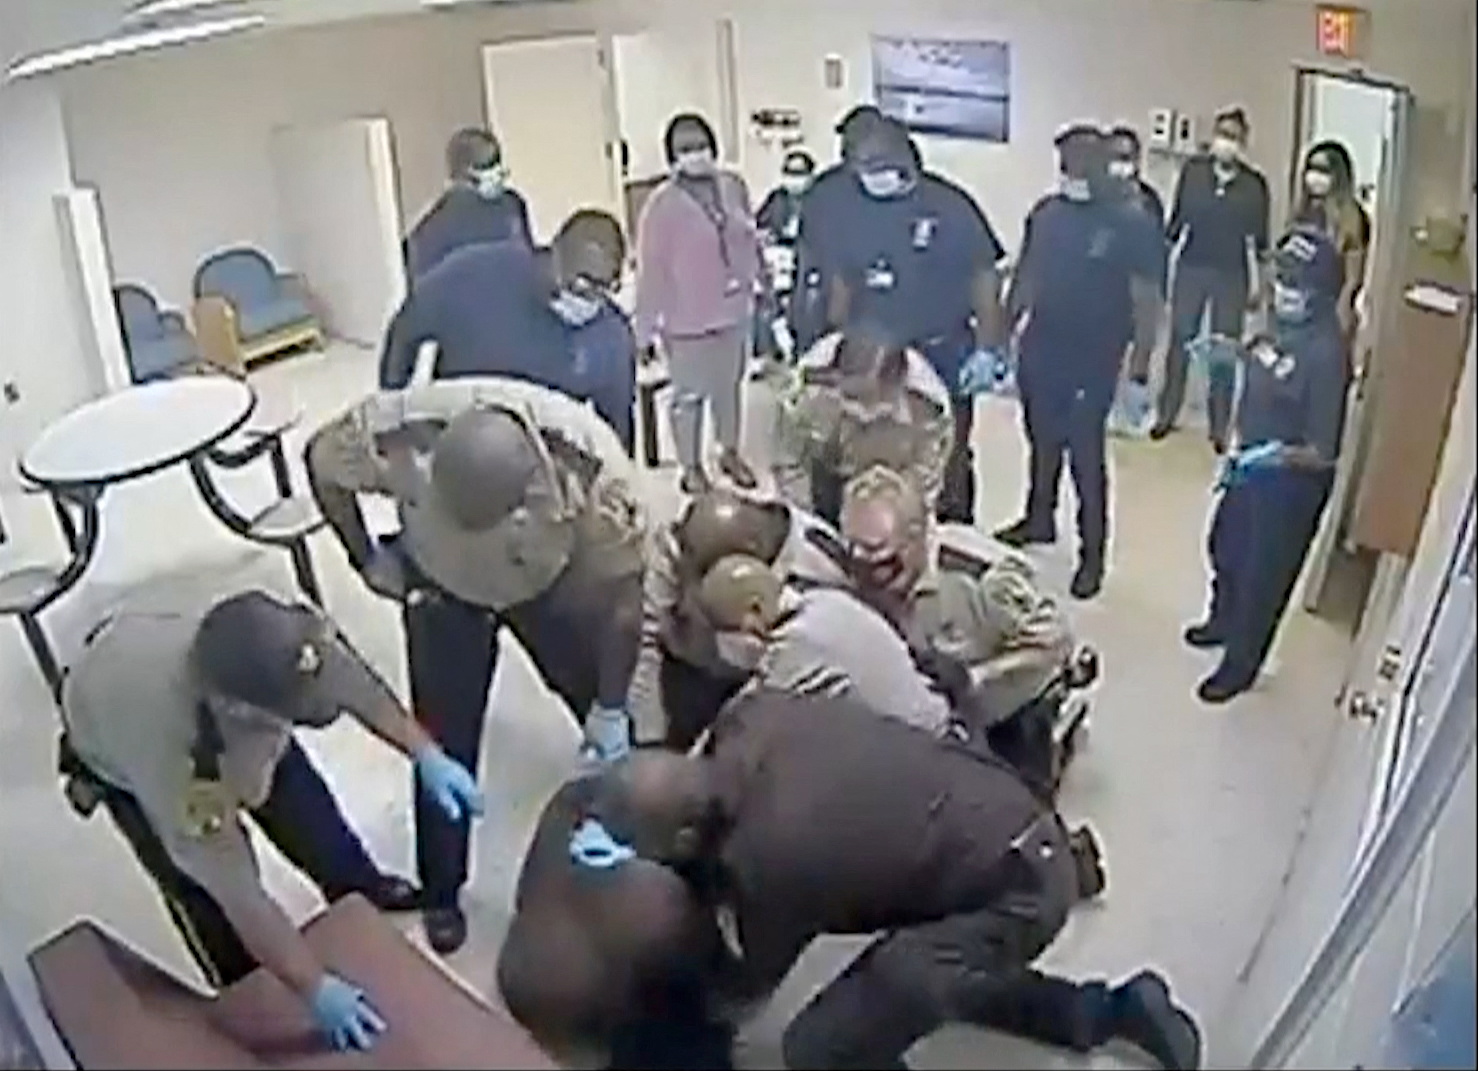 Virginia sheriff deputies wrestle with Irvo Otieno, a 28-year-old Black man, at a state mental hospital before he died, in a still image from video surveillance at Central State Hospital in Petersburg, Virginia, U.S. March 6, 2023. Dinwiddie County Commonwealth Attorney's Office/Handout via REUTERS